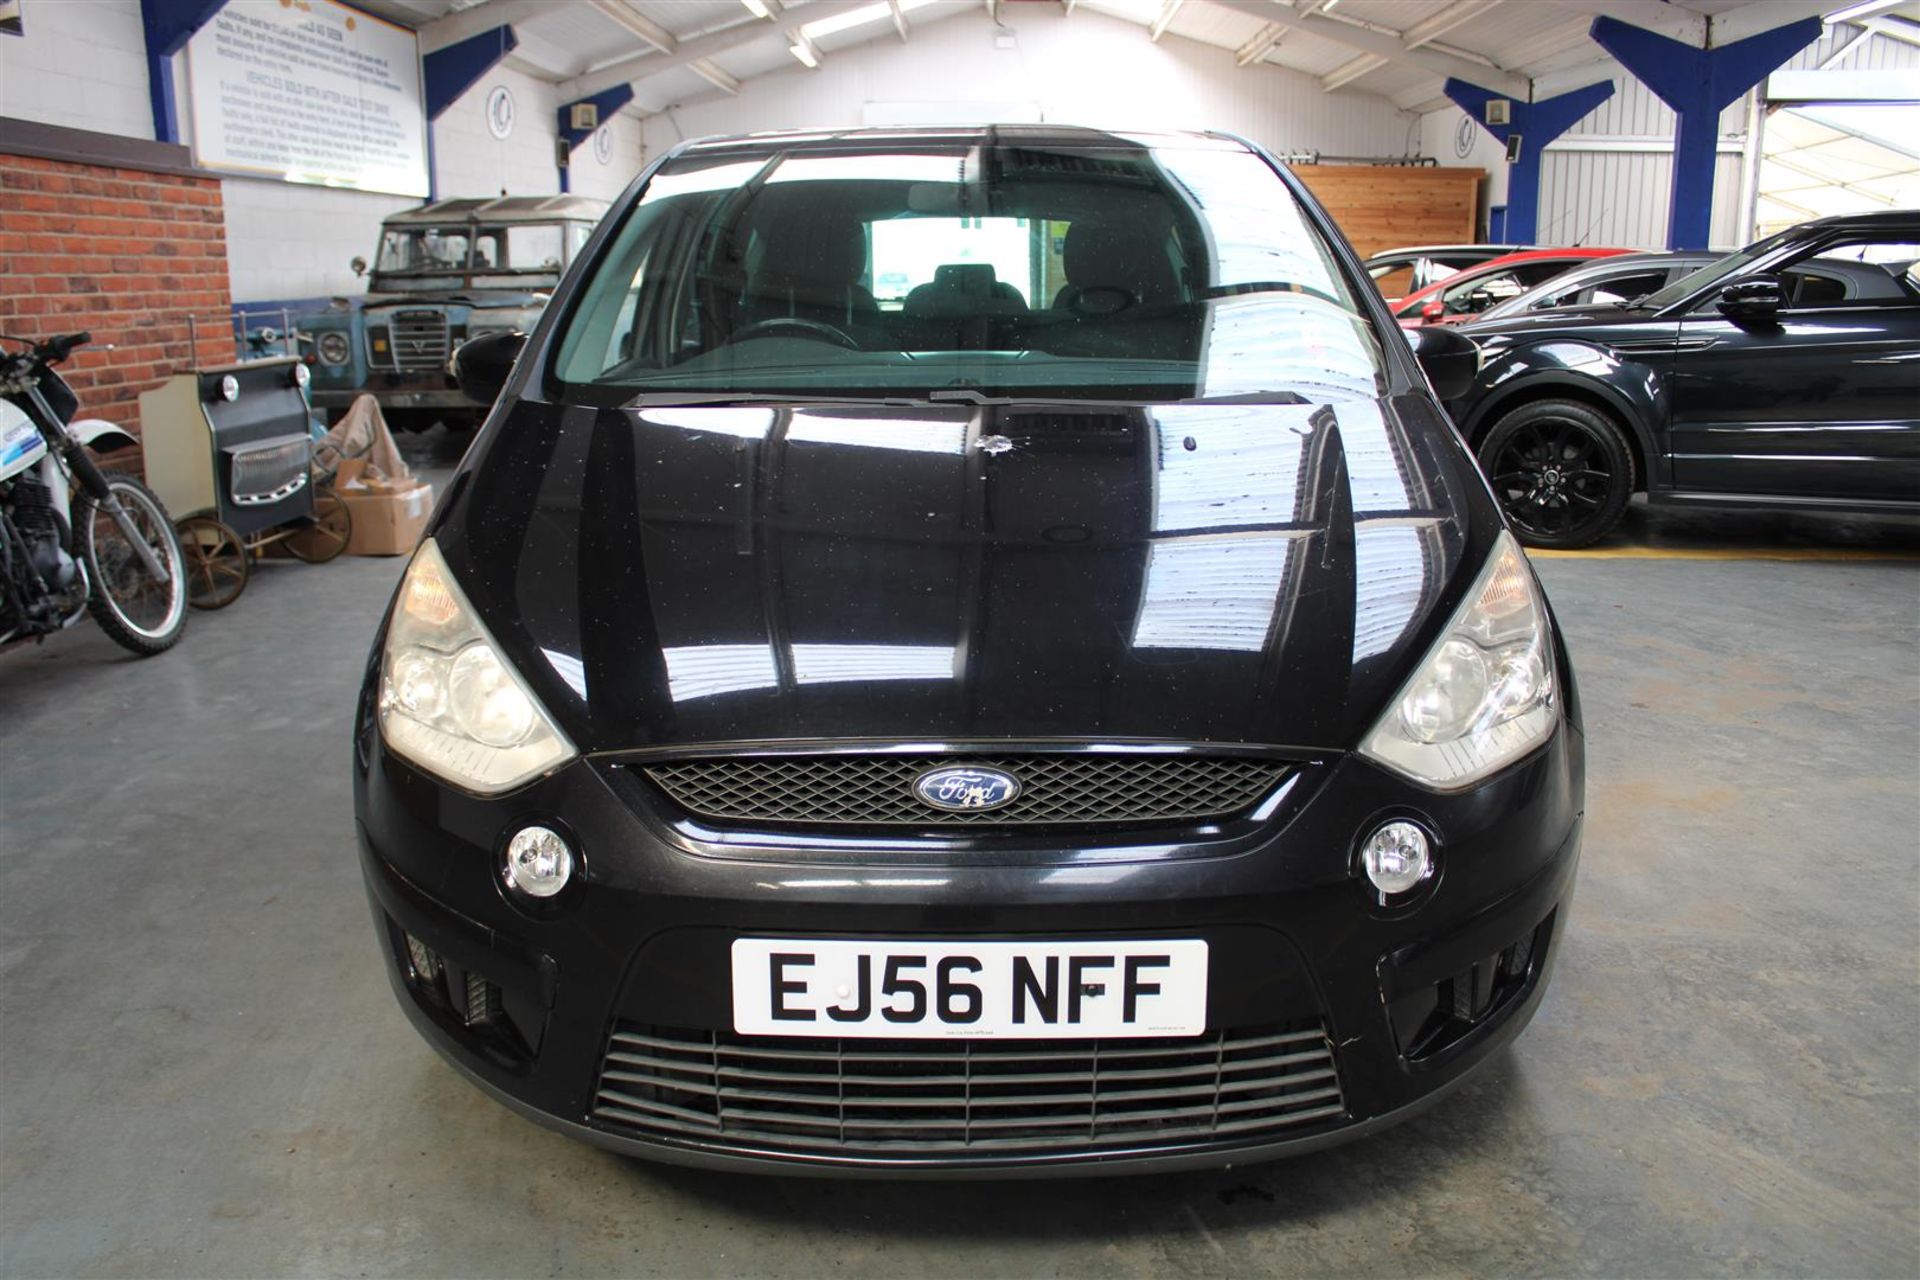 56 06 Ford S-Max Zetec TDCI 6G - Image 2 of 38